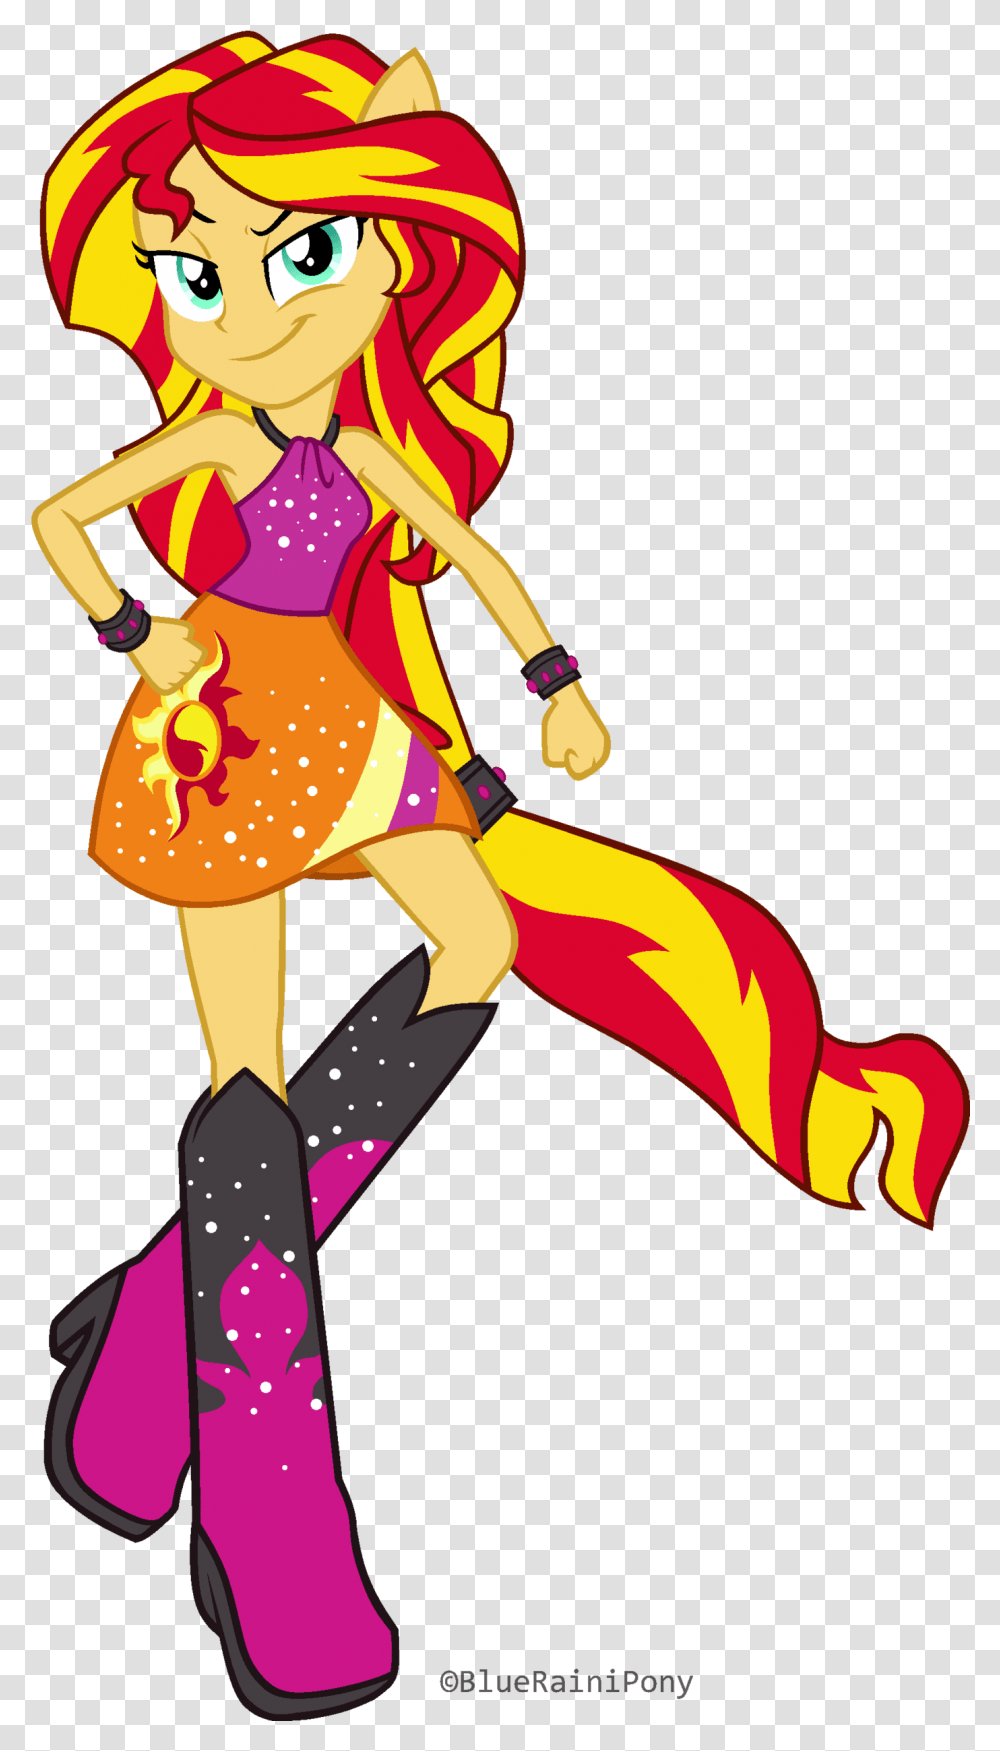 Sunset Shimmer Pic Equestria Girl Sunset Shimmer, Leisure Activities, Dance Pose, Performer Transparent Png